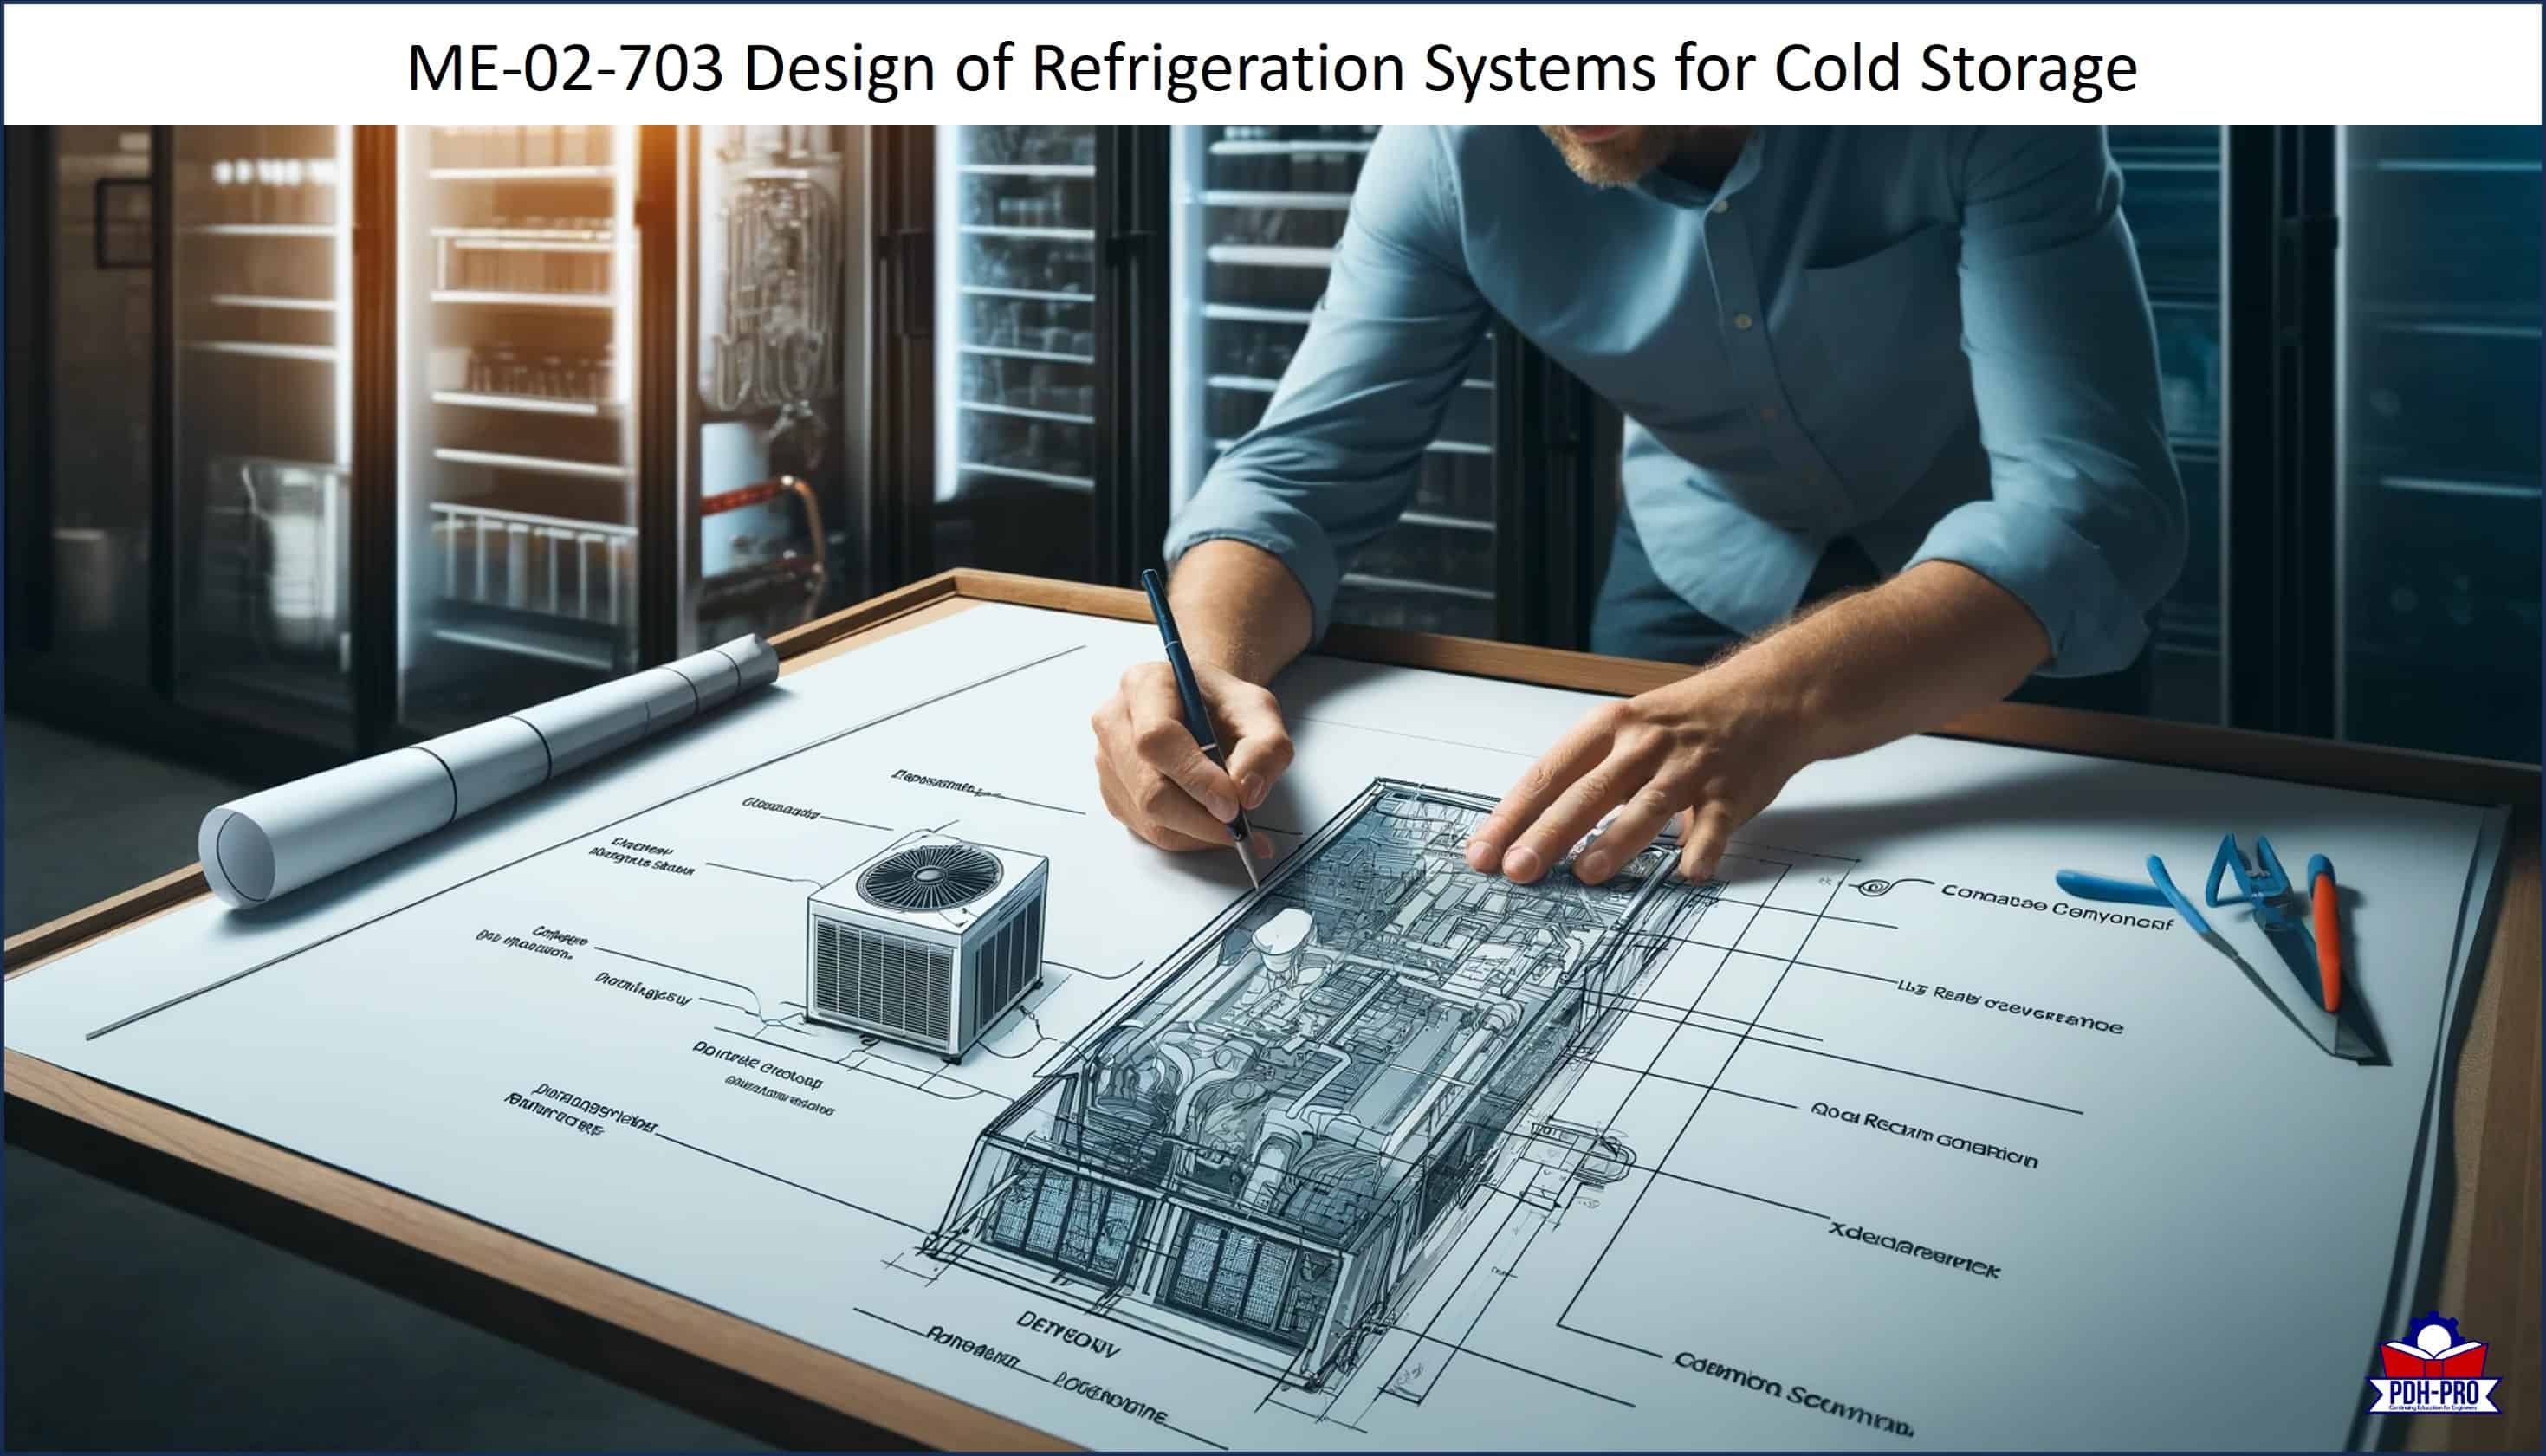 Design of Refrigeration Systems for Cold Storage